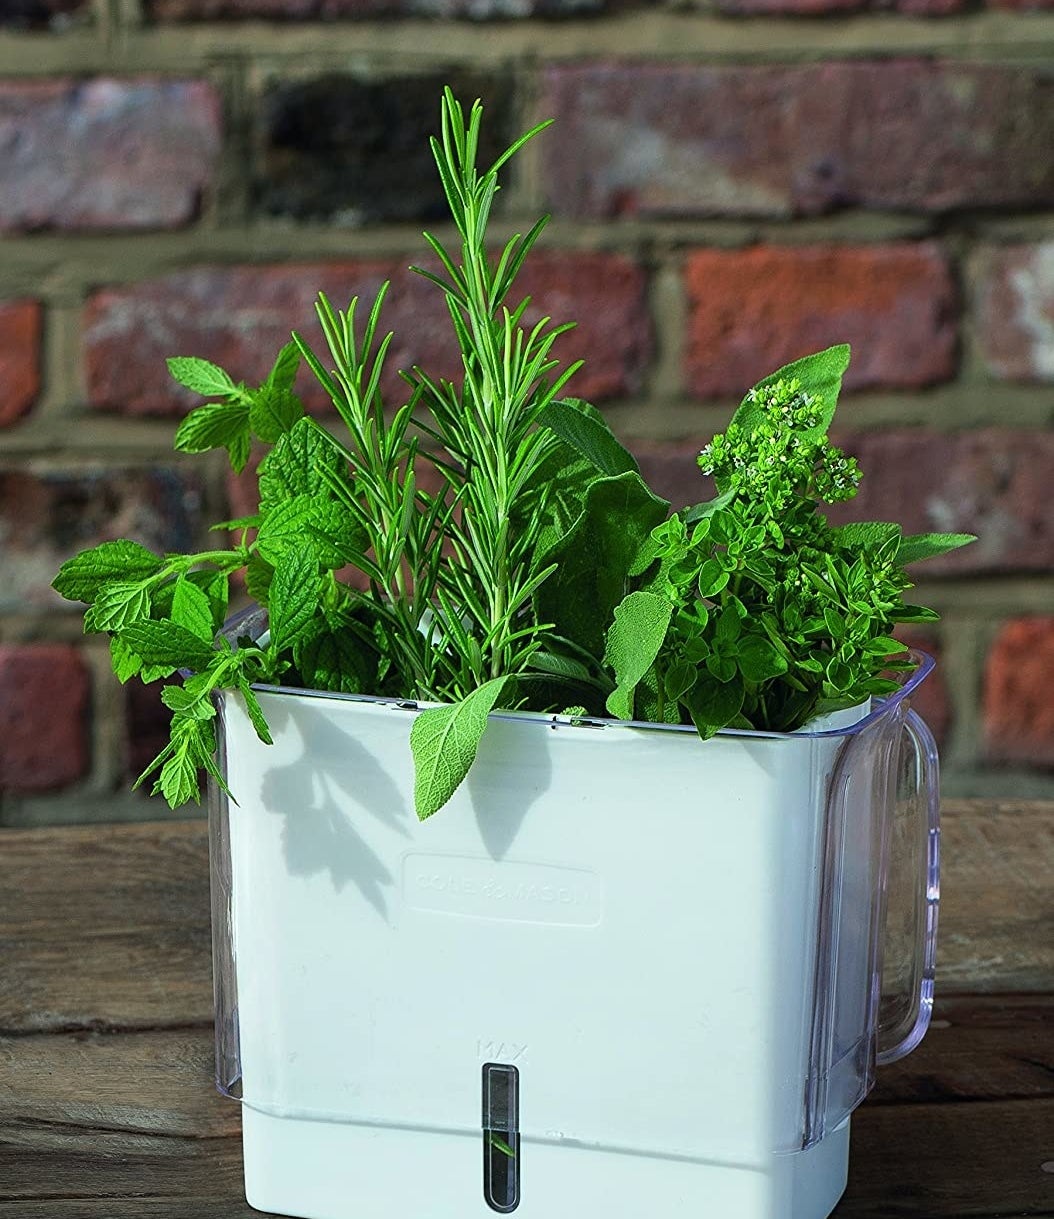 A container with fresh herbs inside